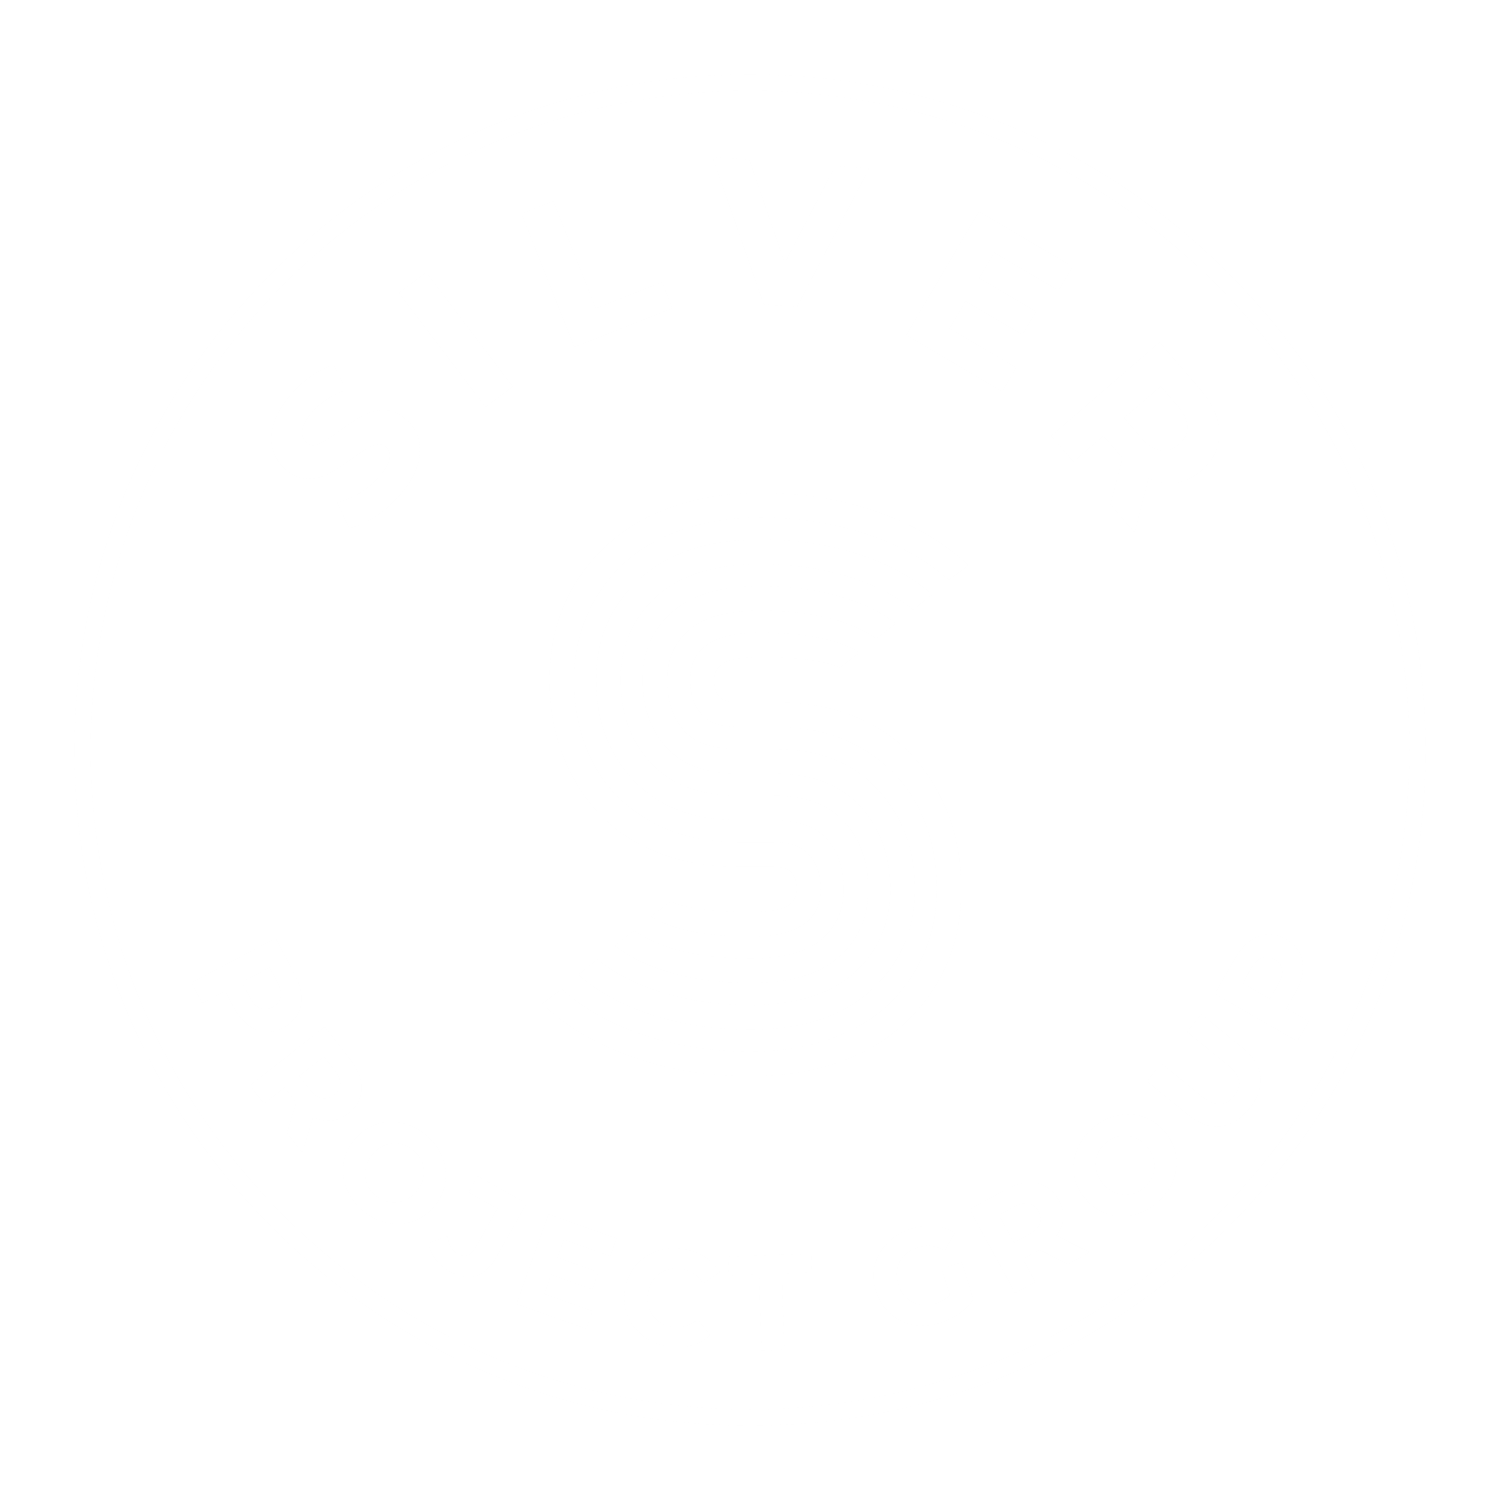 Silver Project Group